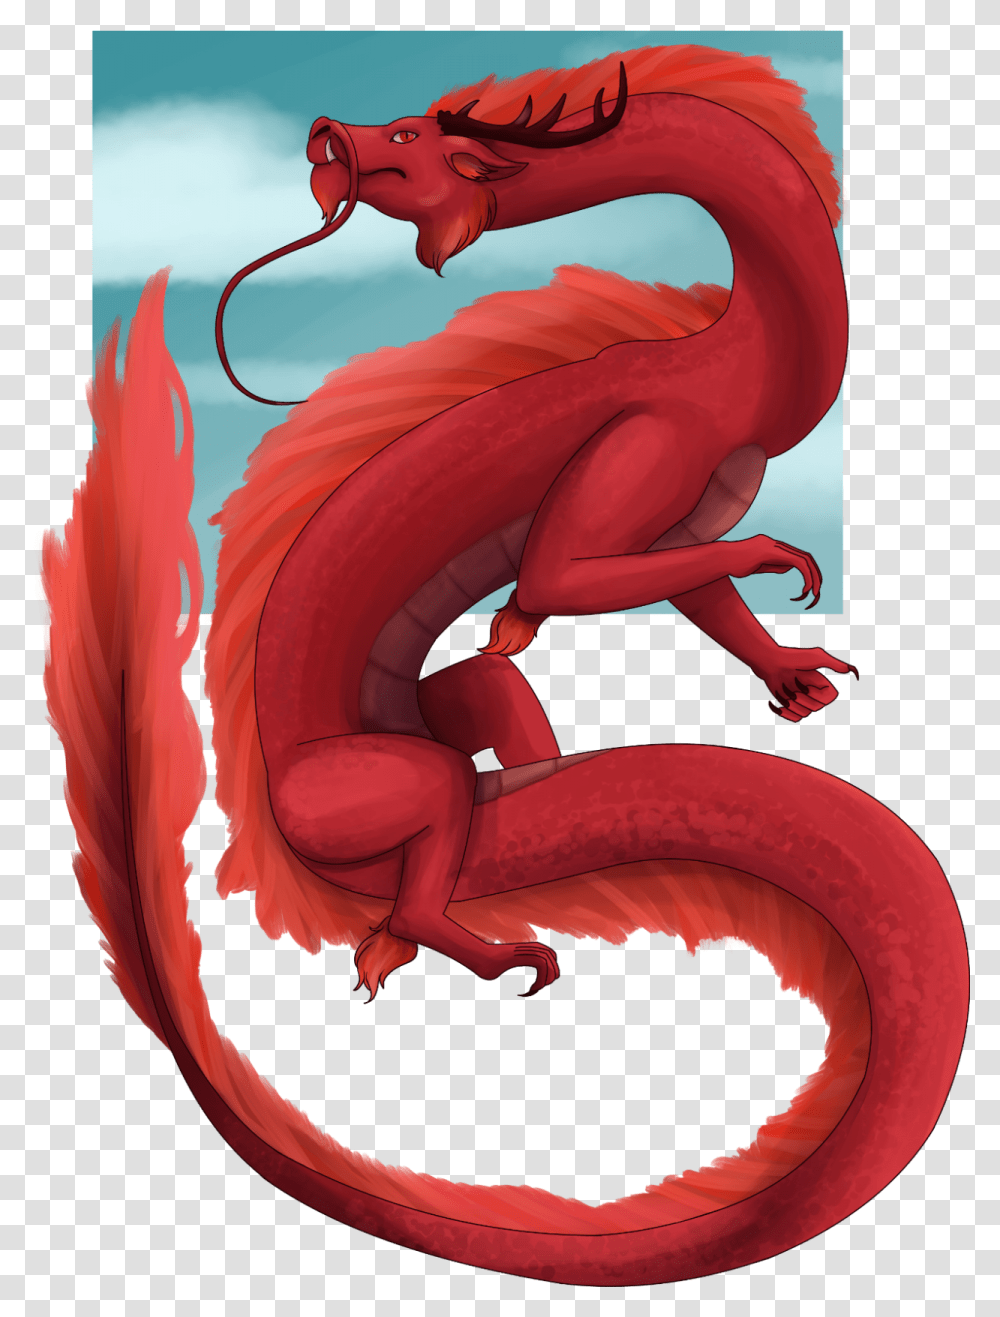 Dragon Of The Week Ao Qinthe Red Dragon God Of The Illustration Transparent Png